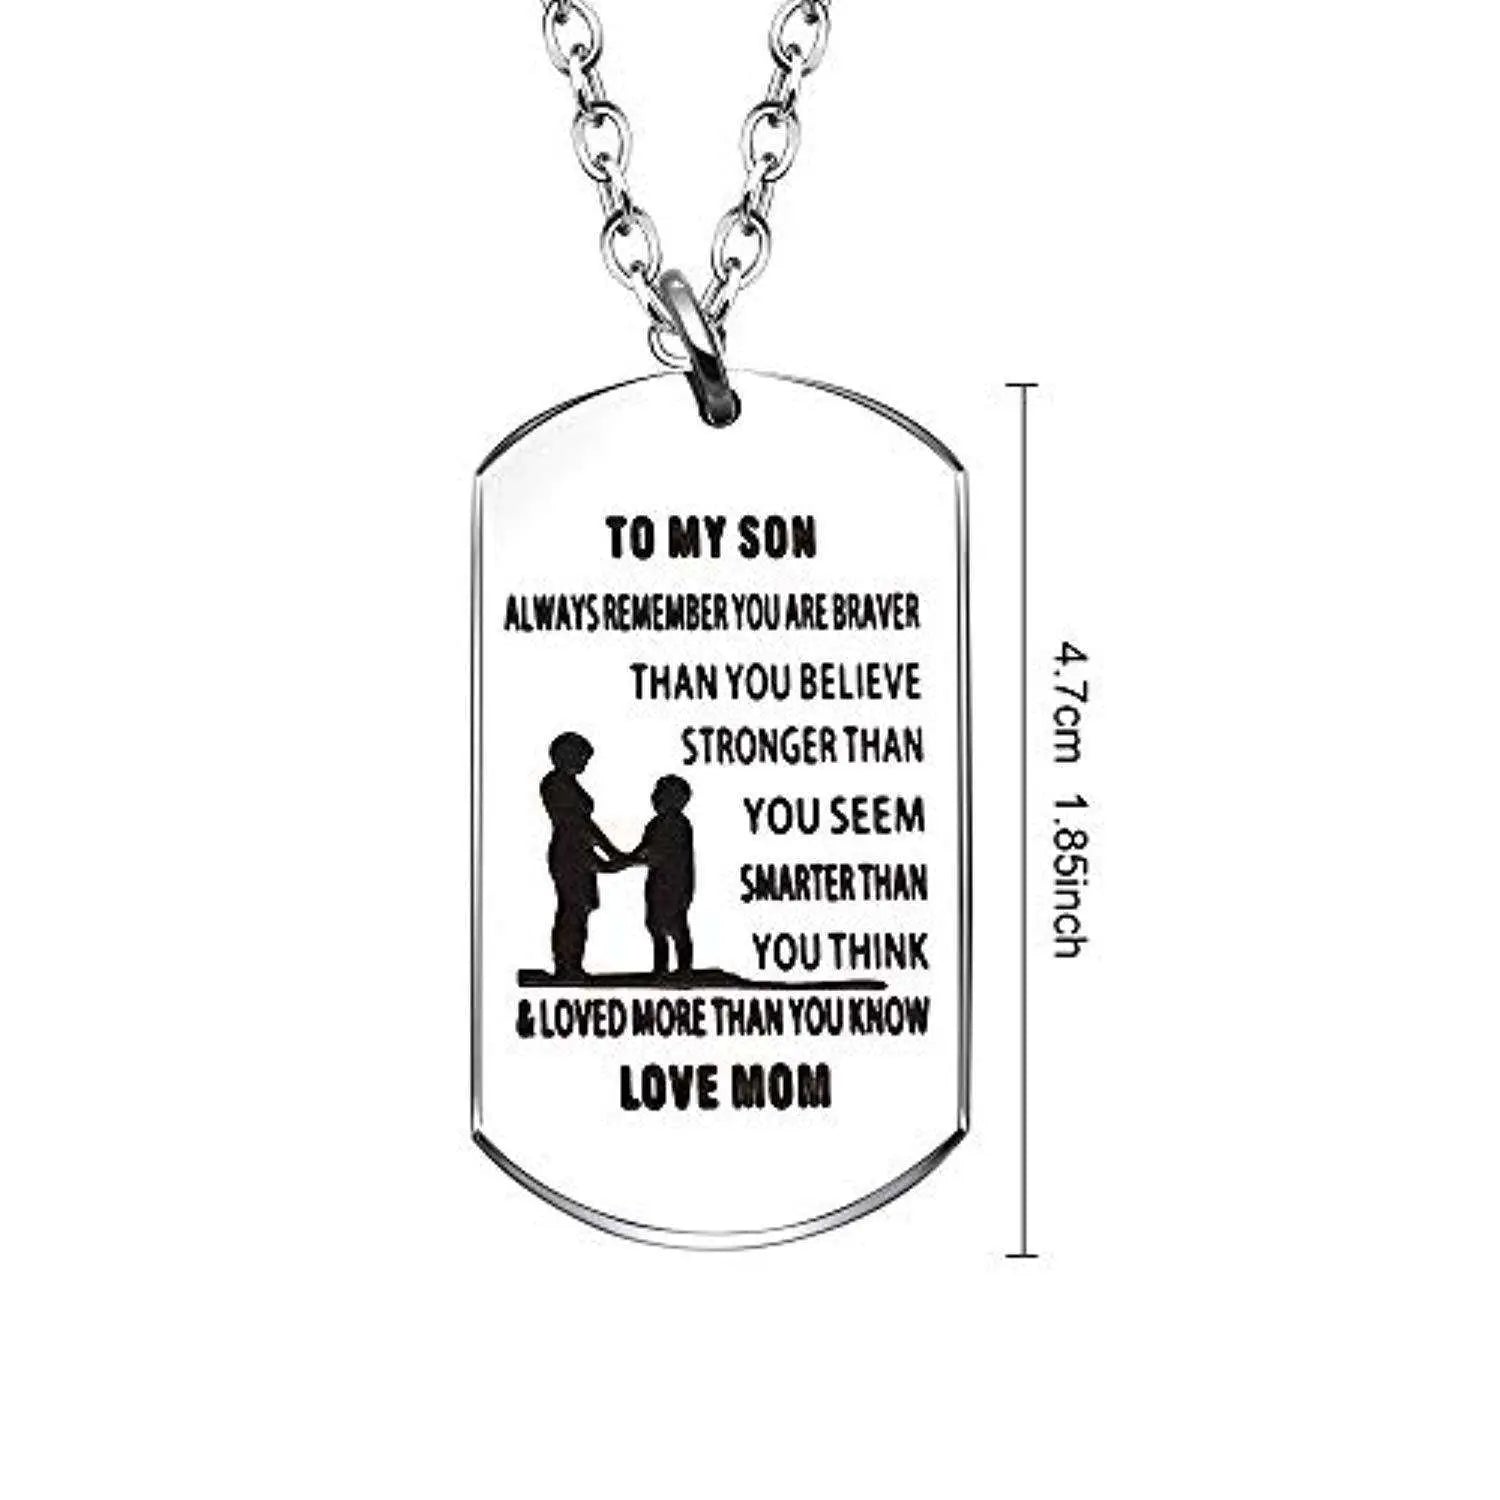 Sentimental "To My Son" Dog Tag Keepsake Necklace In God's Service Store